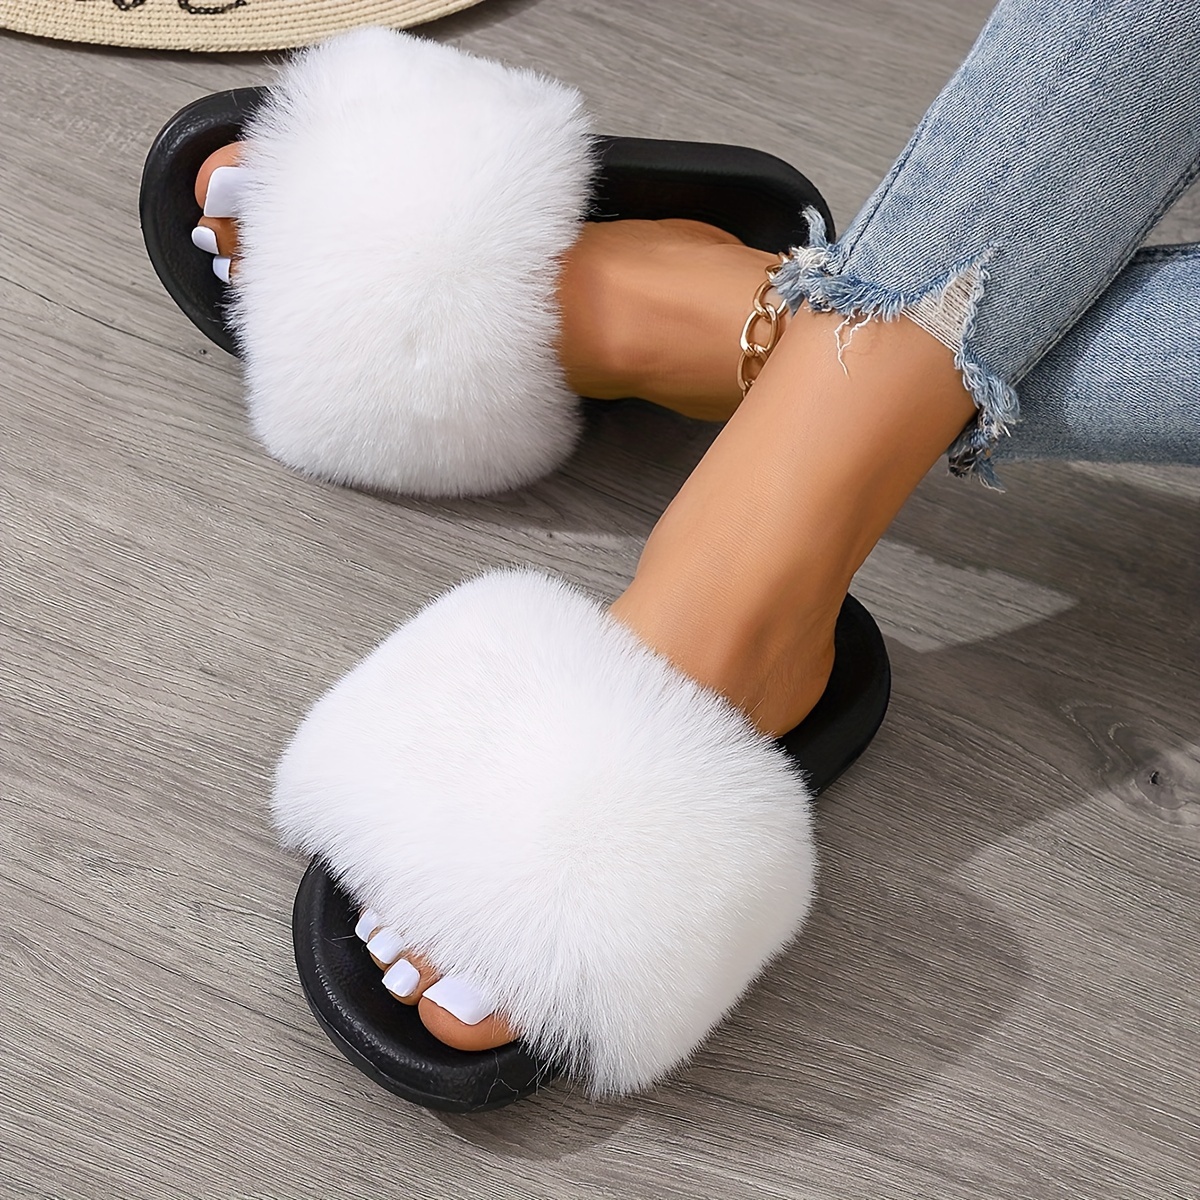 

Women's Fluffy Faux Fur Slippers, Open Toe Soft Plush Indoor & Outdoor Shoes, Comfy Eva Sole Slide Shoes